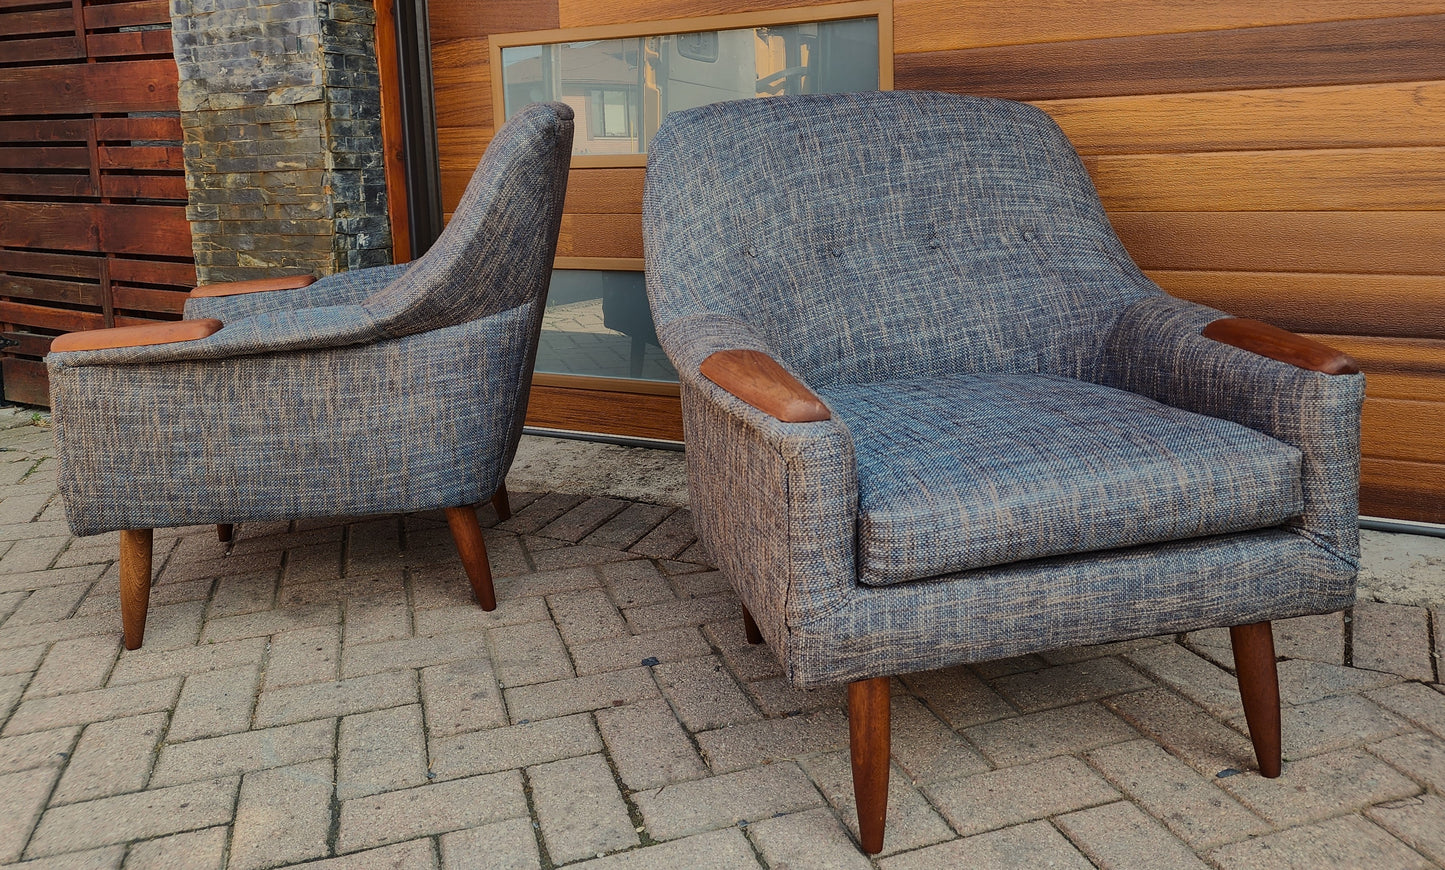 REFINISHED REUPHOLSTERED Danish Mid Century Modern Teak Lounge Chairs, set of 2